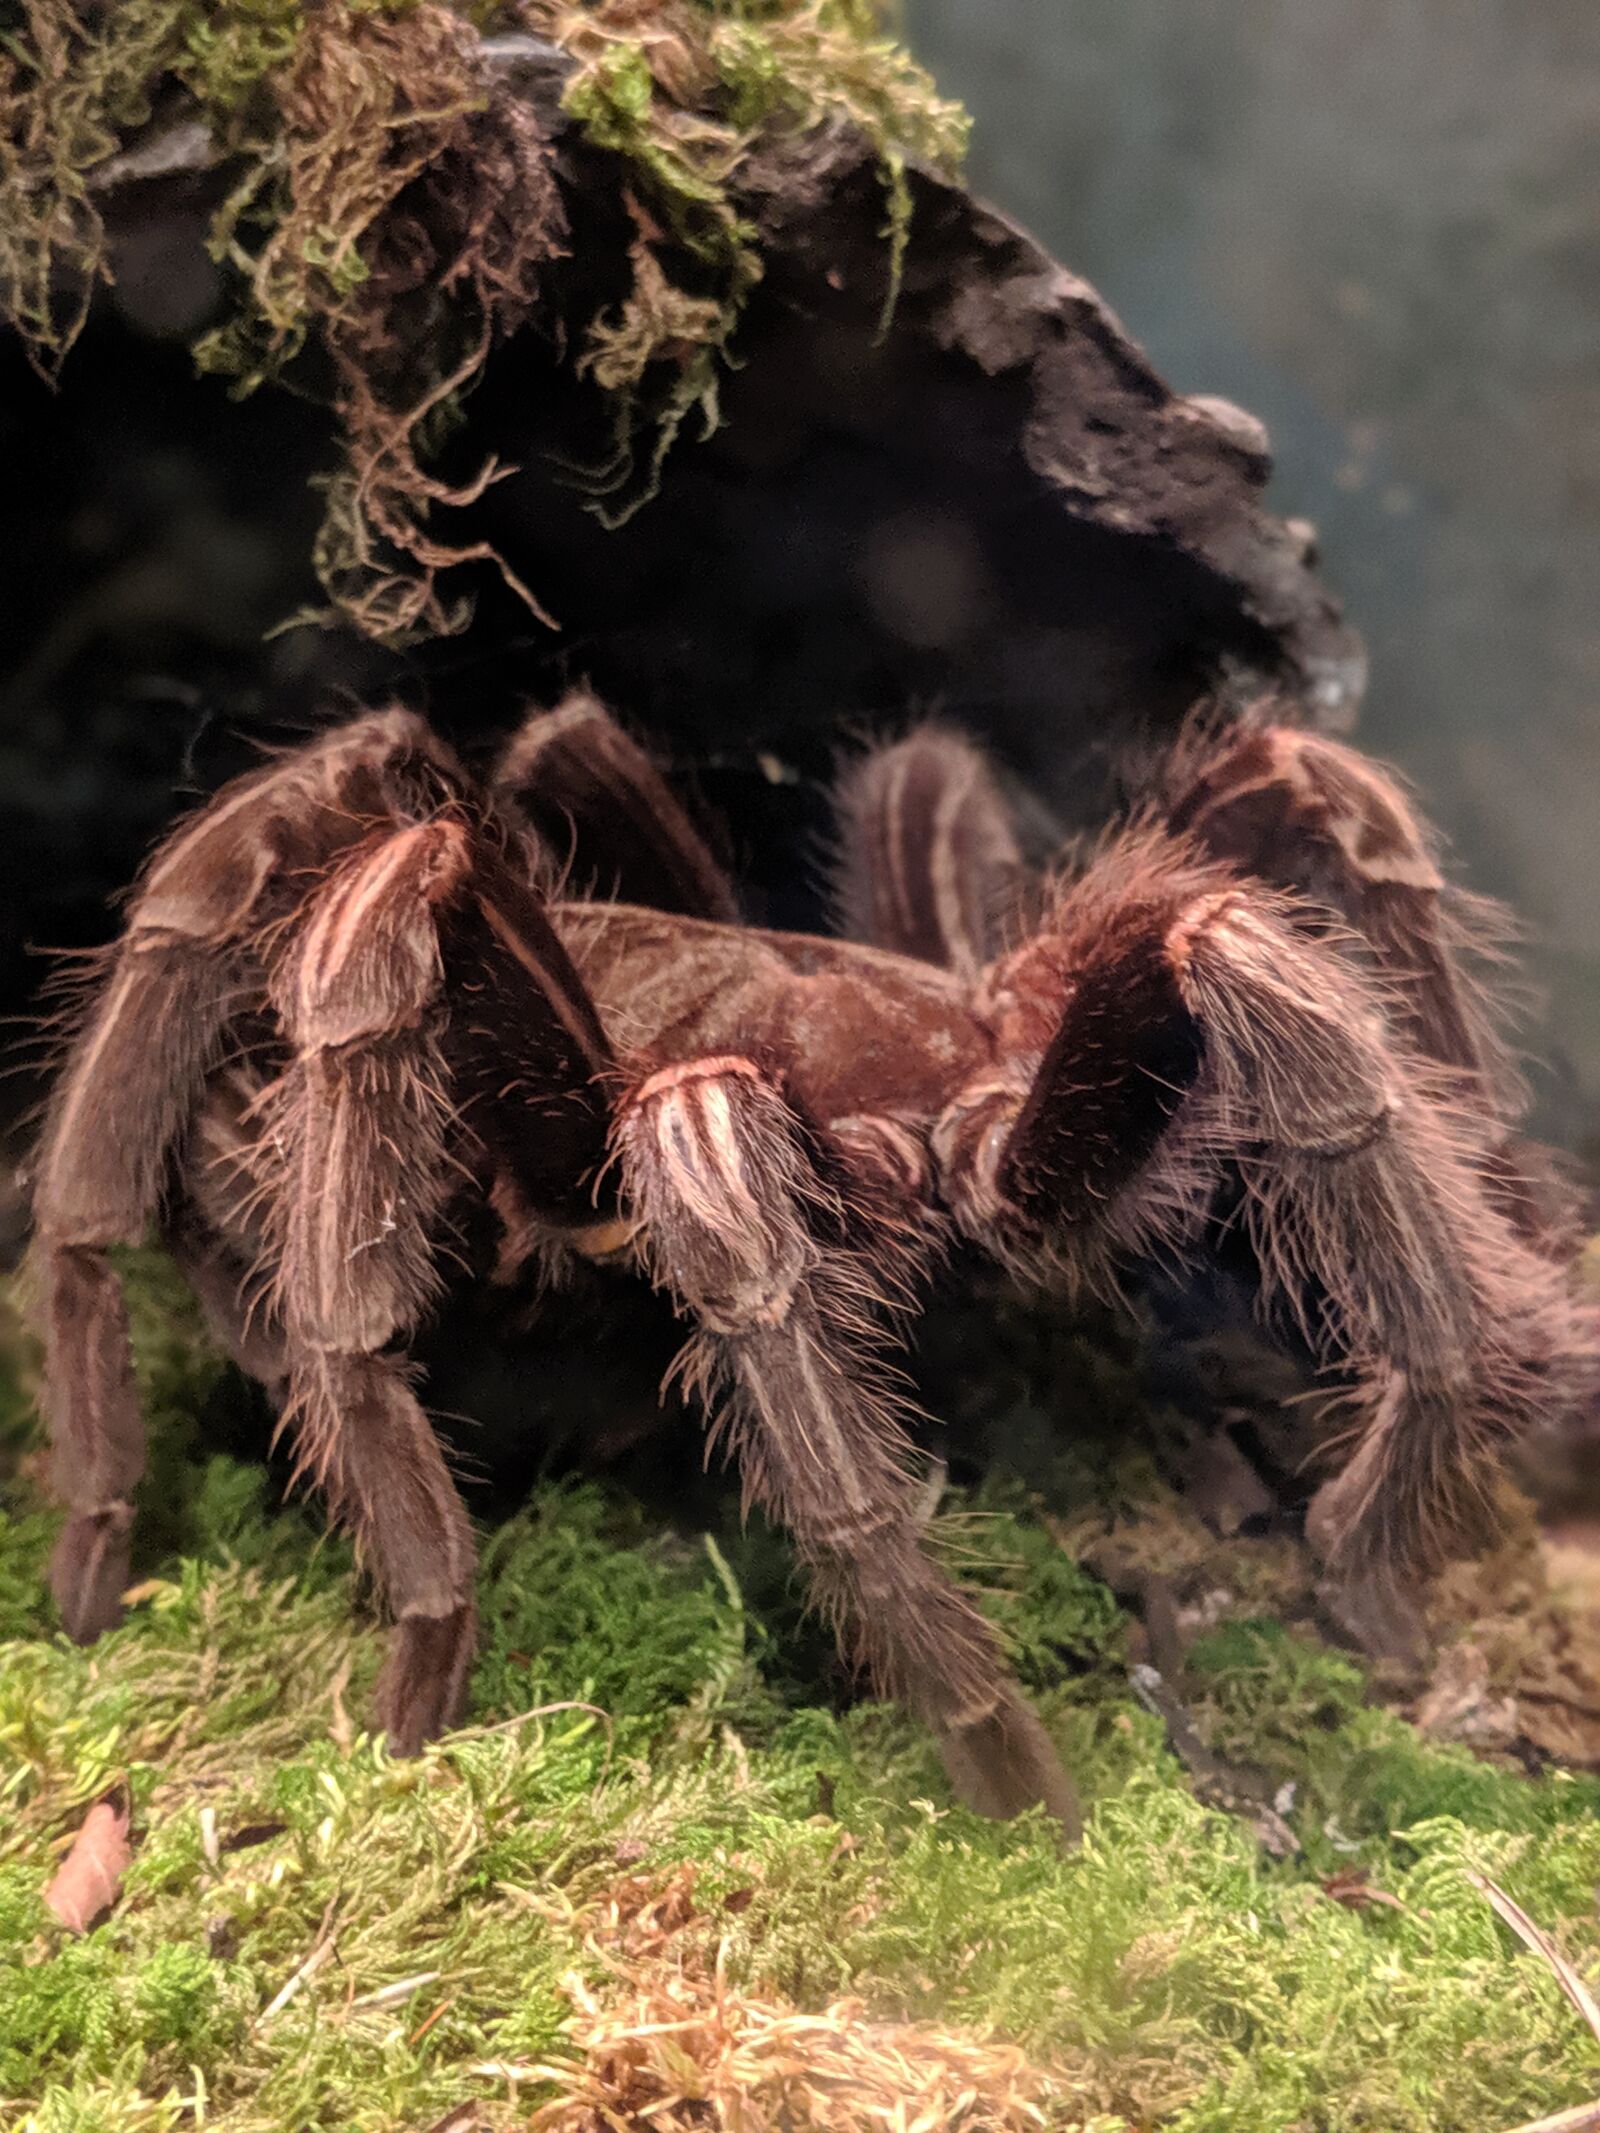 Google Pixel 3a sample photo. Spider, creepy, nature photography